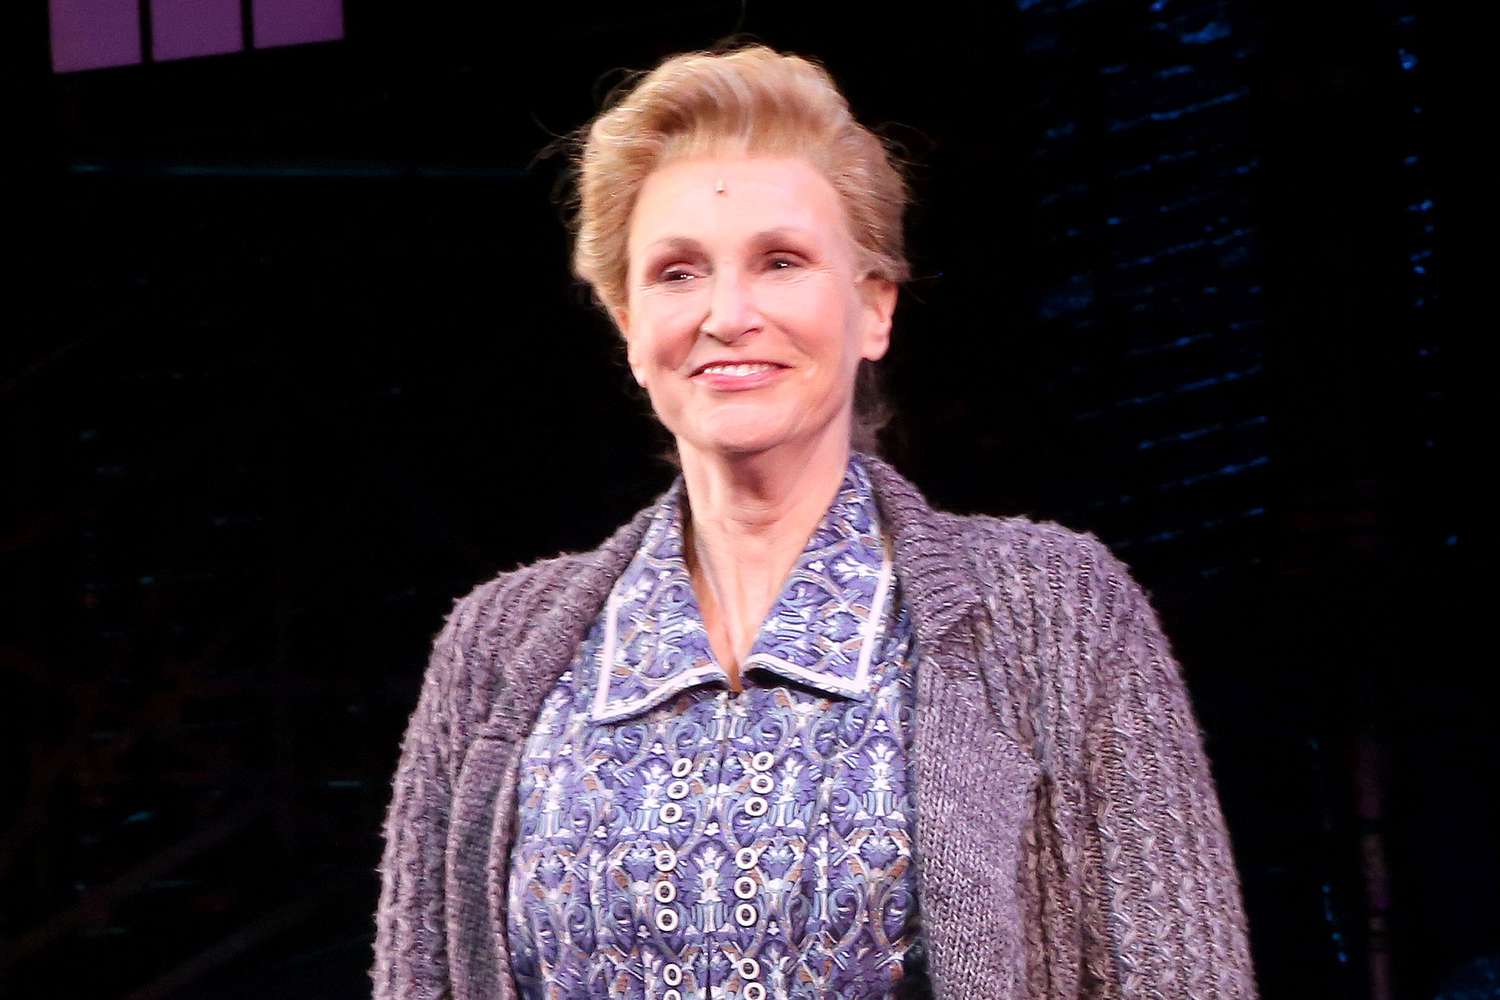 Jane Lynch as "Rosie Brice" during the opening night curtain call for the musical "Funny Girl" on Broadway at The August Wilson Theatre on April 24, 2022 in New York City.